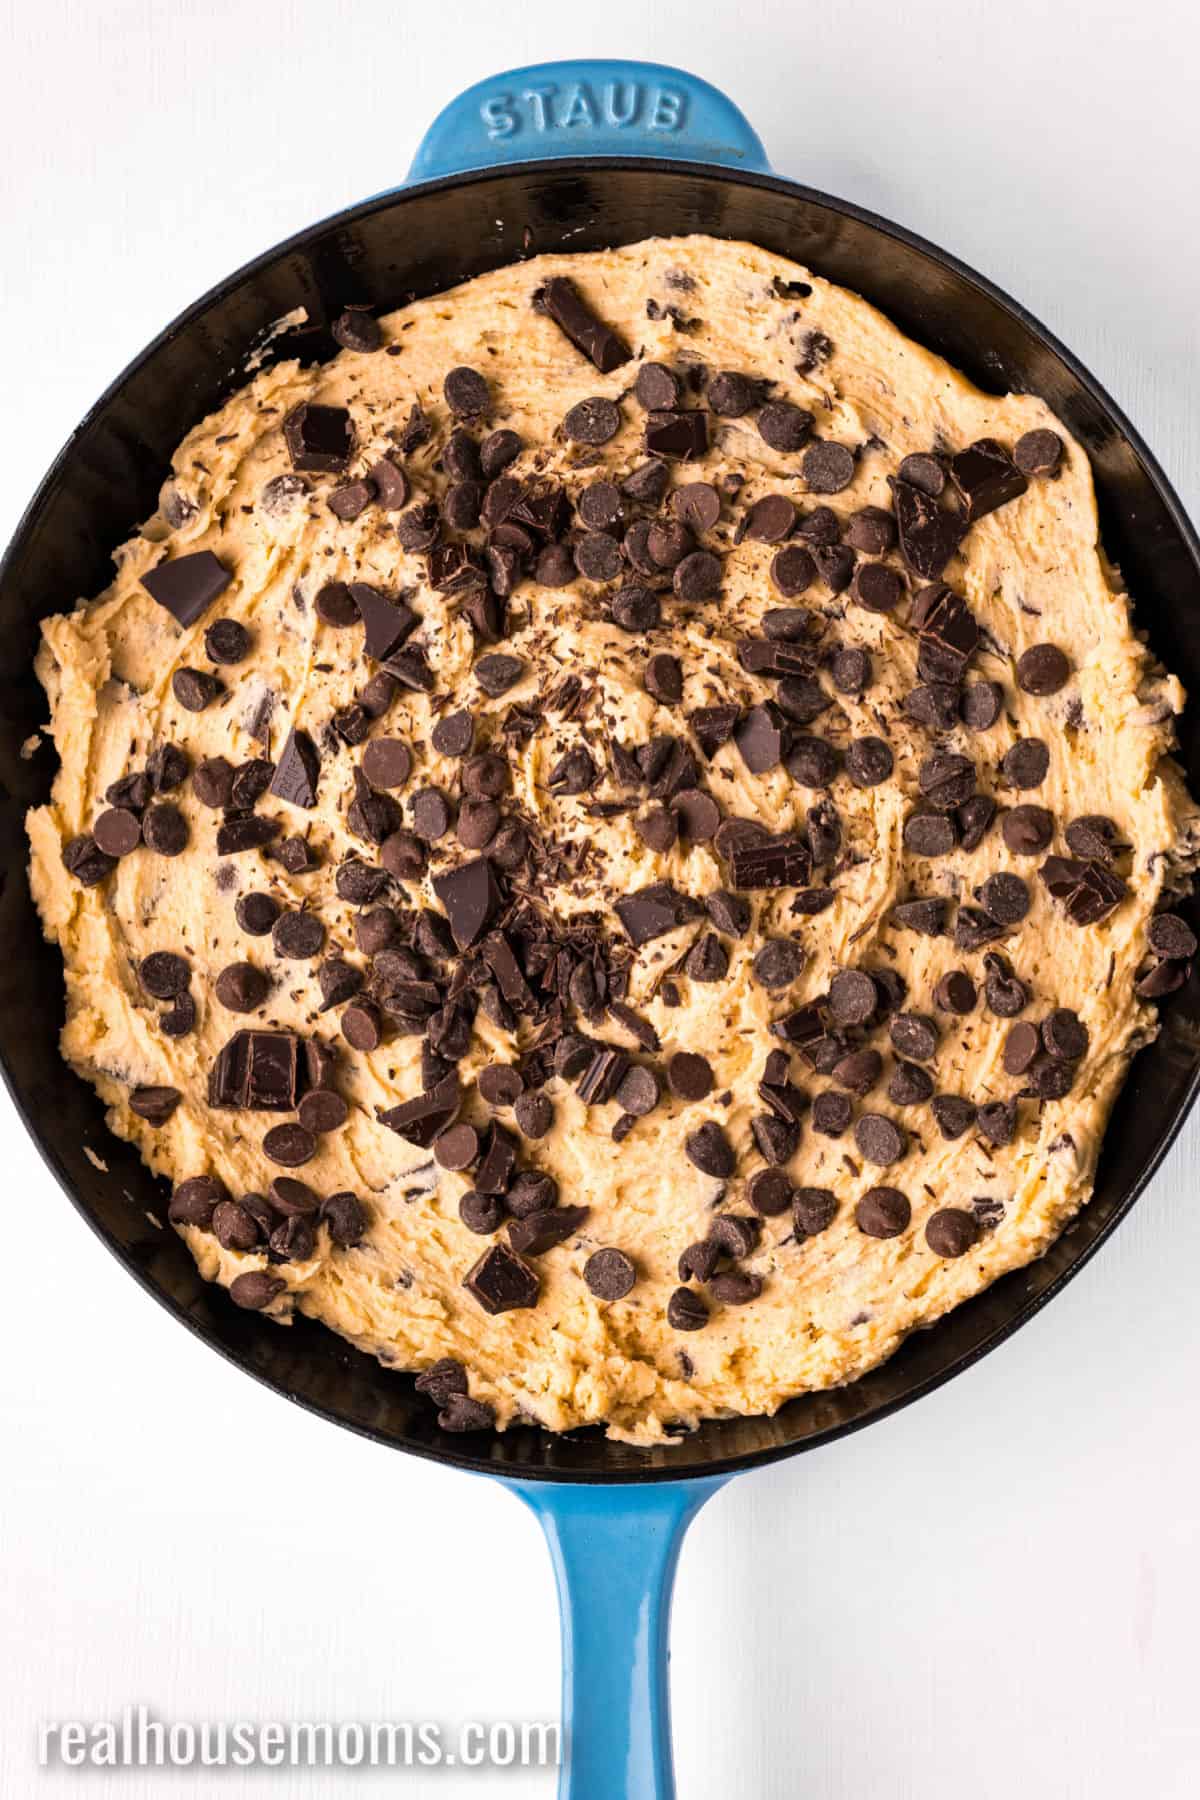 Skillet Candy Bar Chocolate Chip Cookie - Lolo Home Kitchen